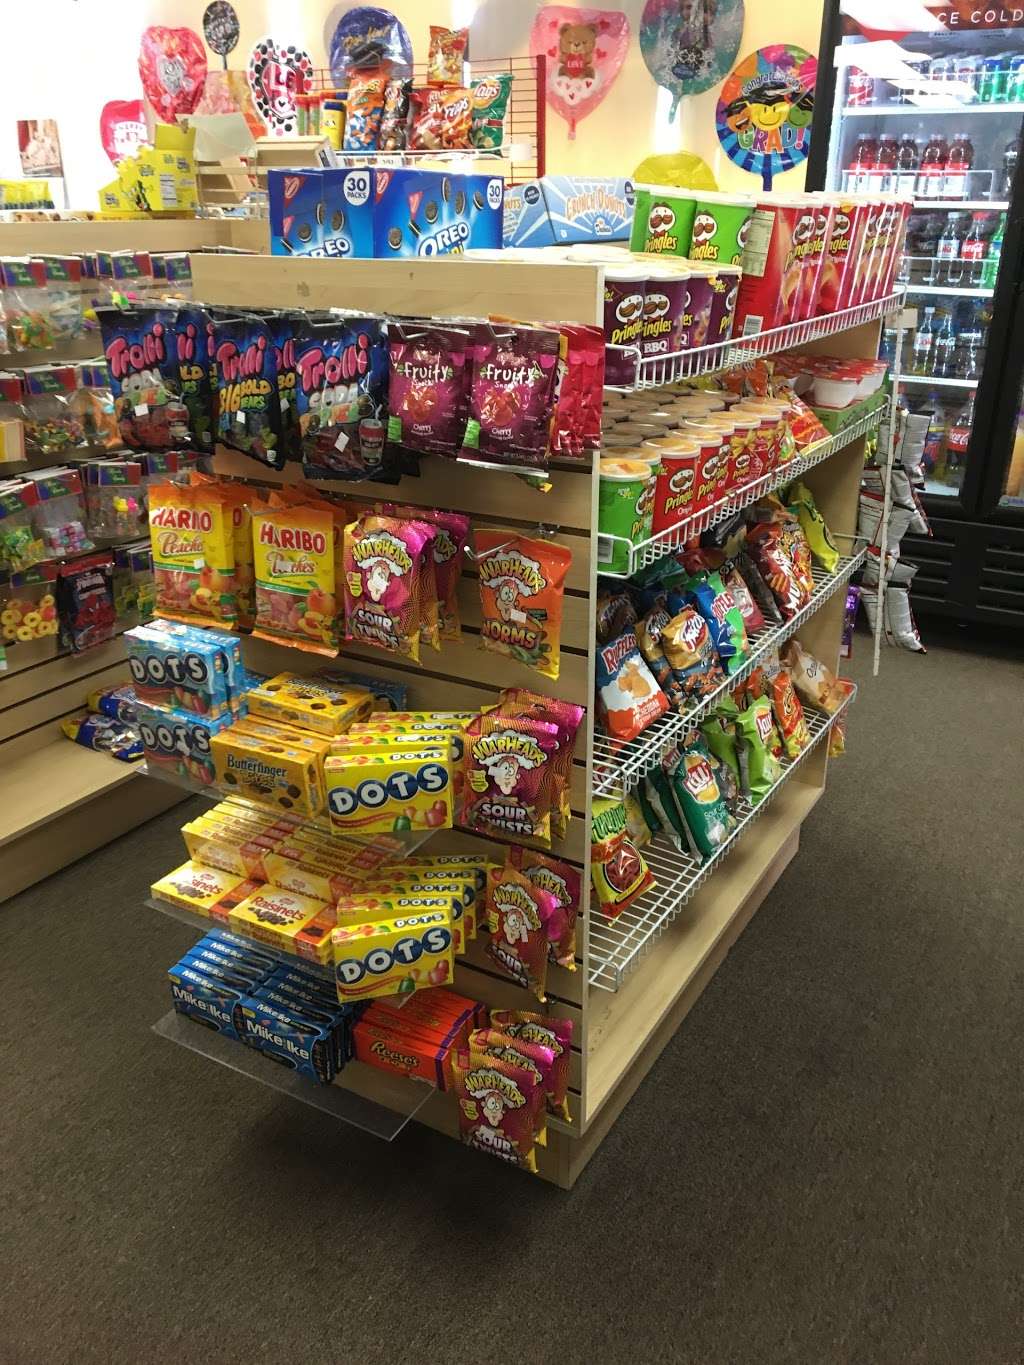 99 Cents | 10204 Atlantic Ave, South Gate, CA 90280